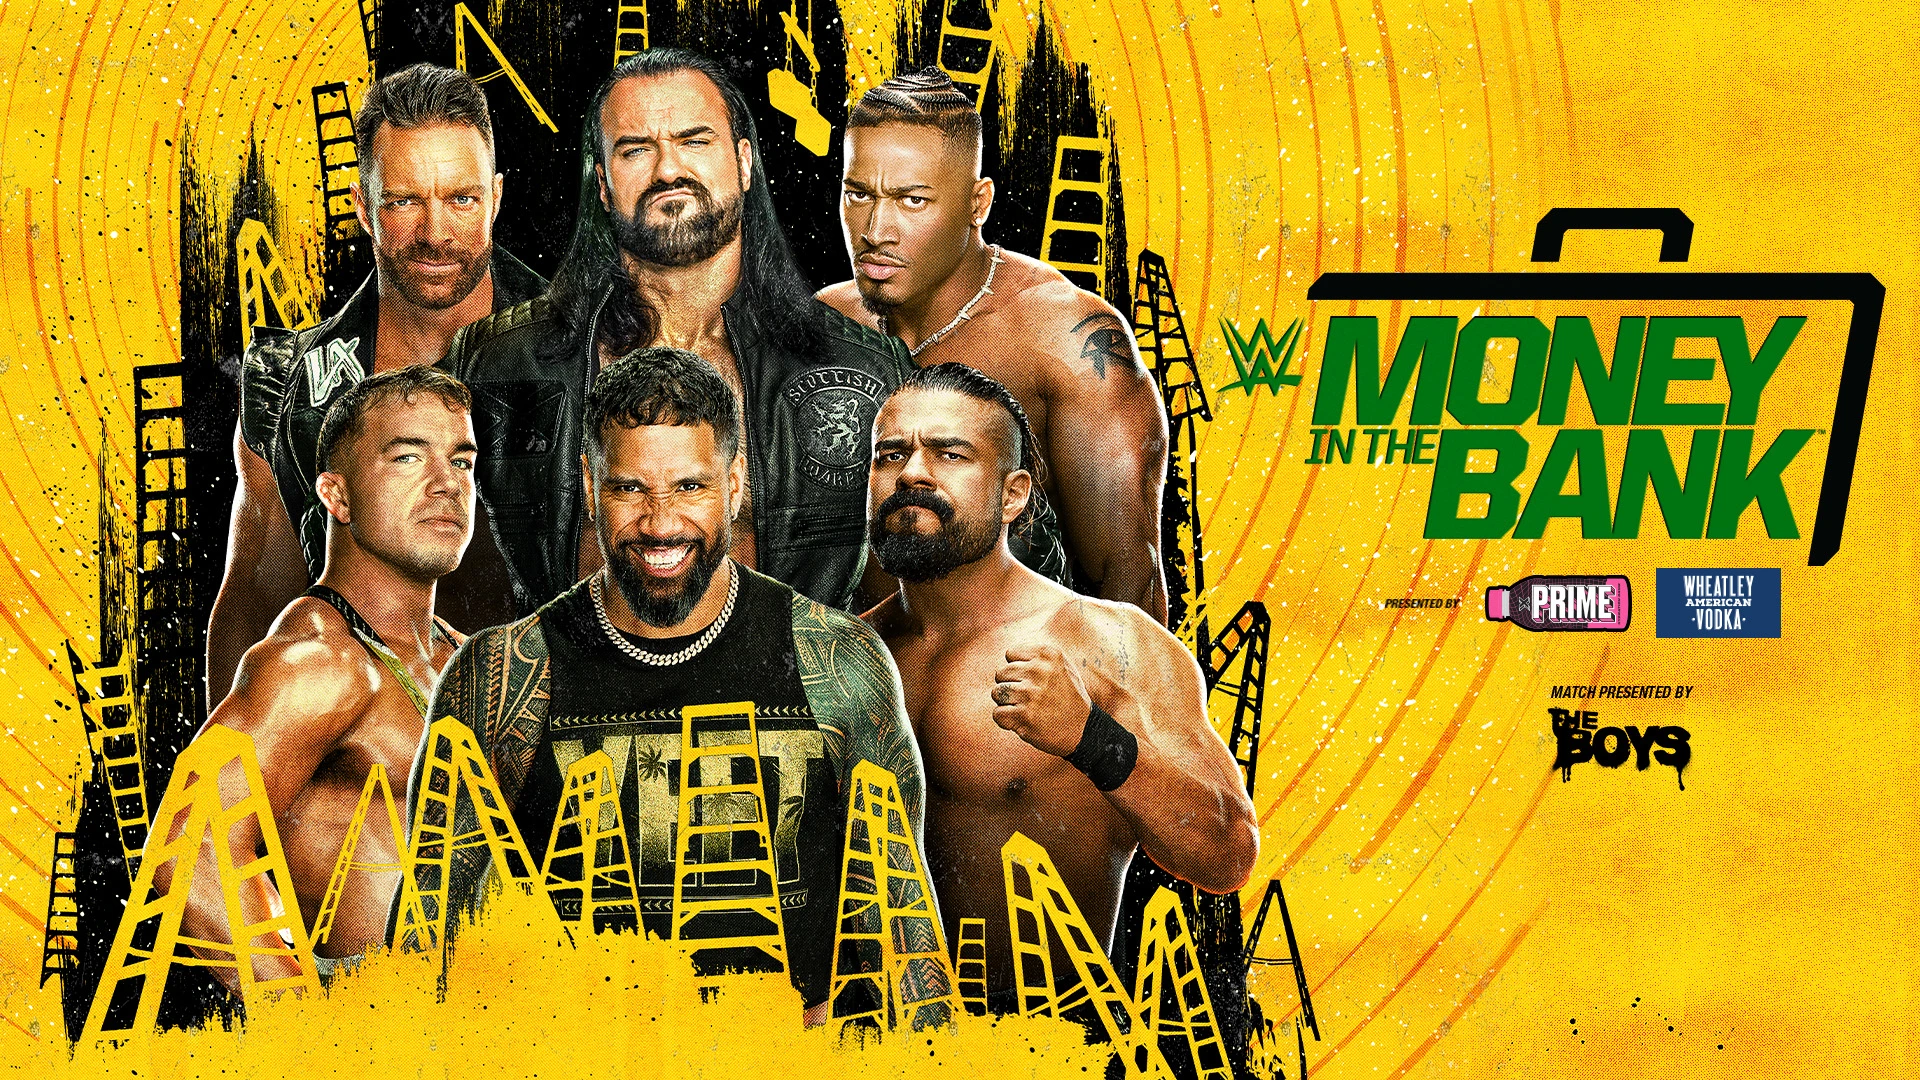 Who will alter their career in the Men’s Money in the Bank Ladder Match?